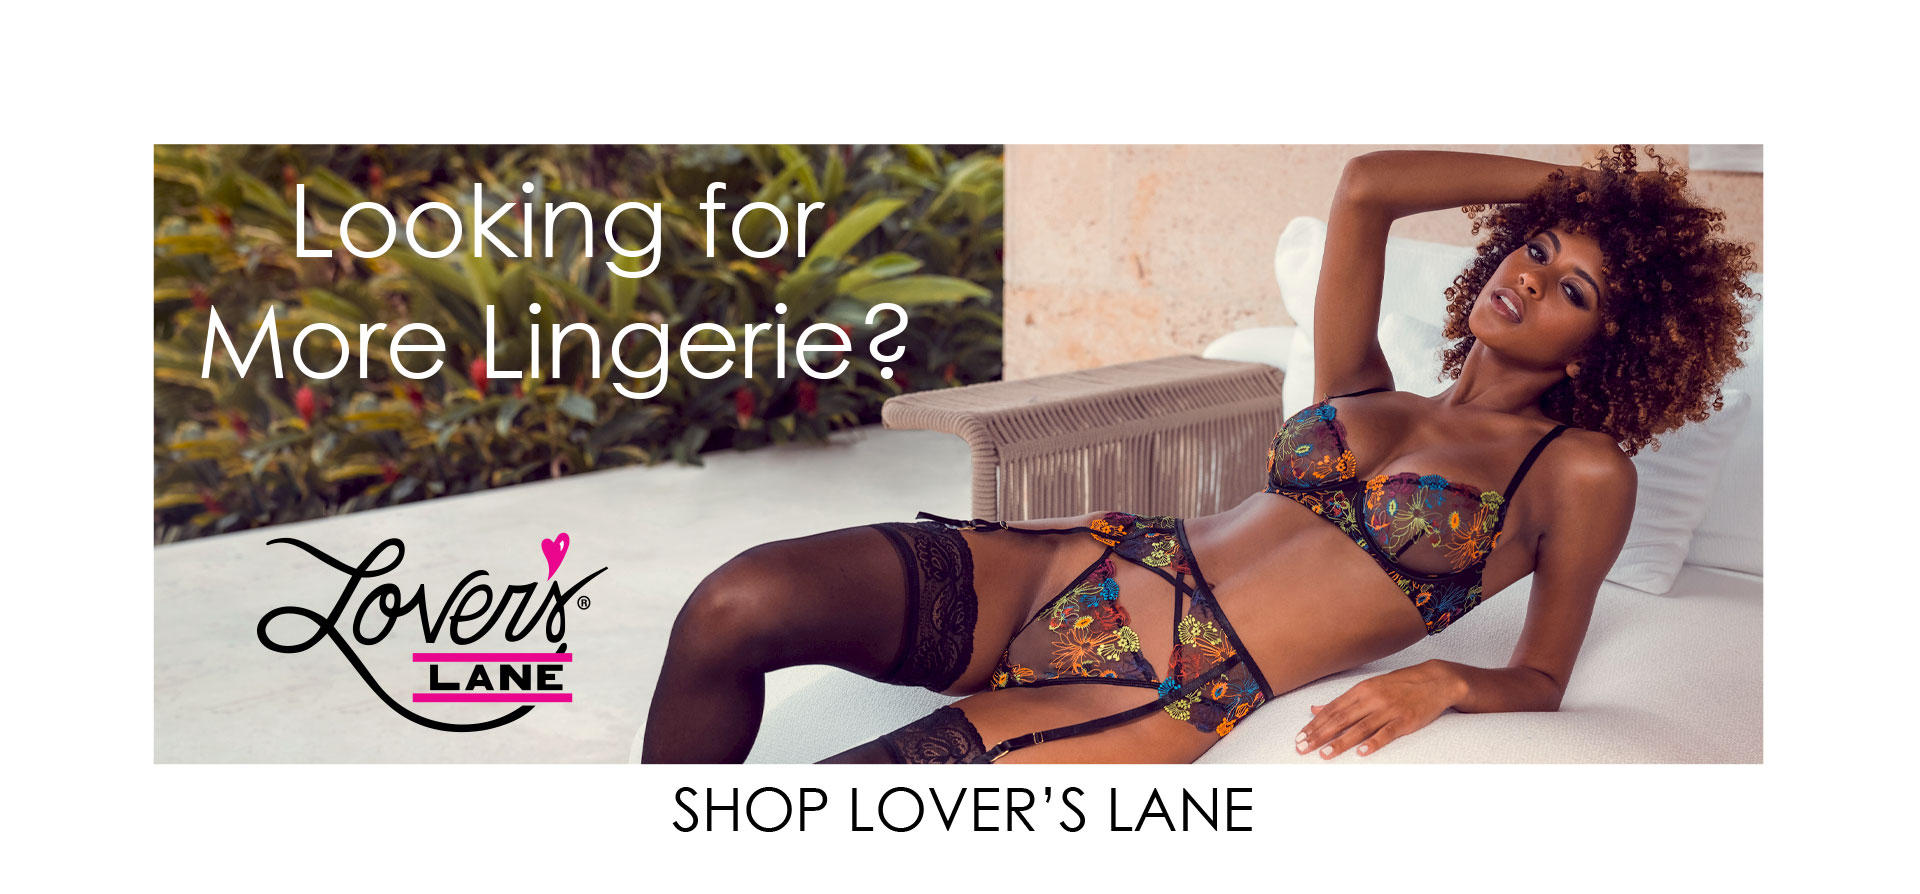 Looking for more lIngerie? Shop Lover's Lane